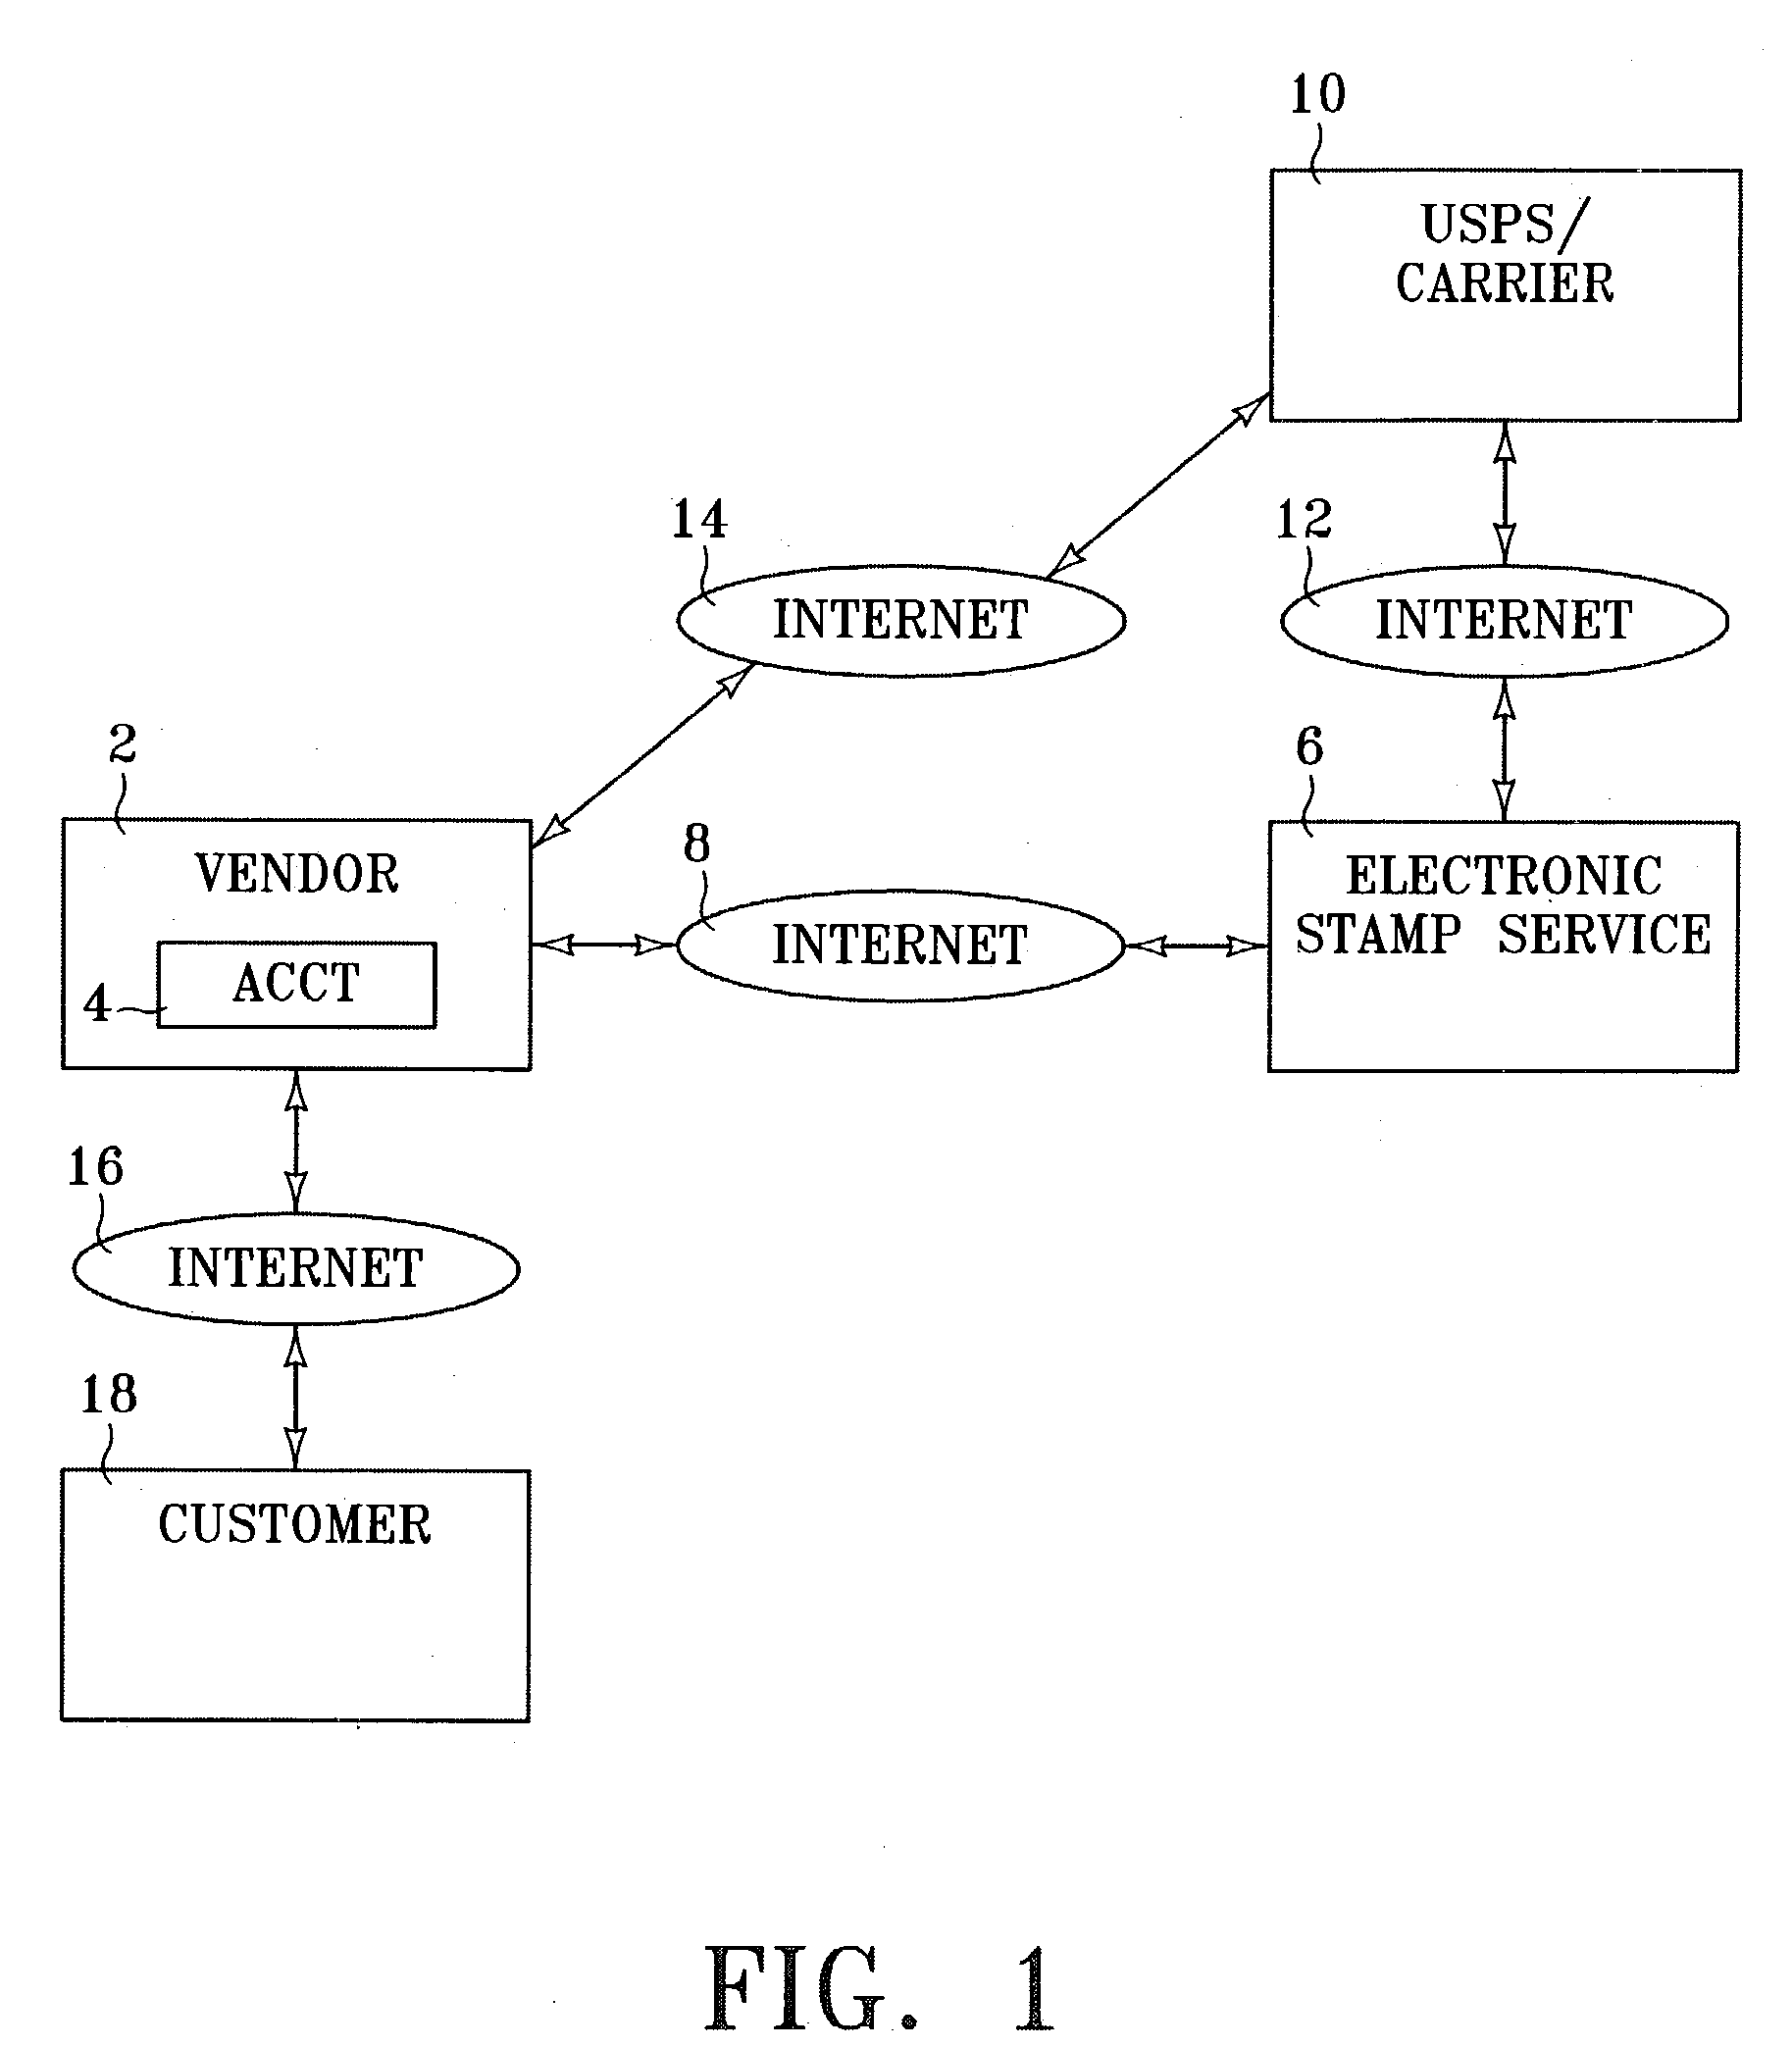 Method and apparatus for enabling third party utilization of postage account